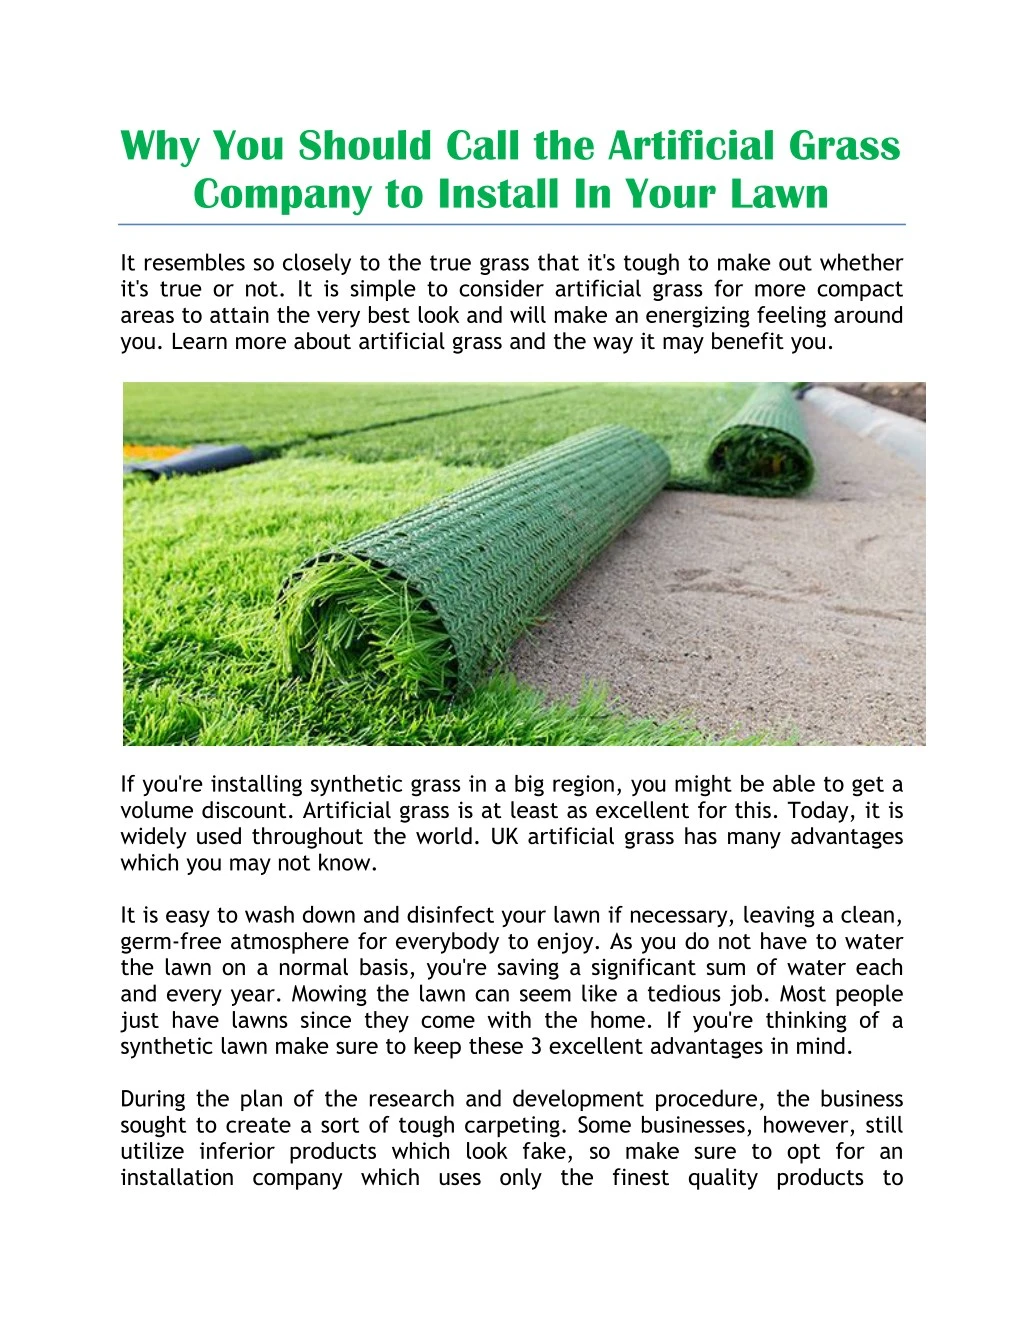 why you should call the artificial grass company